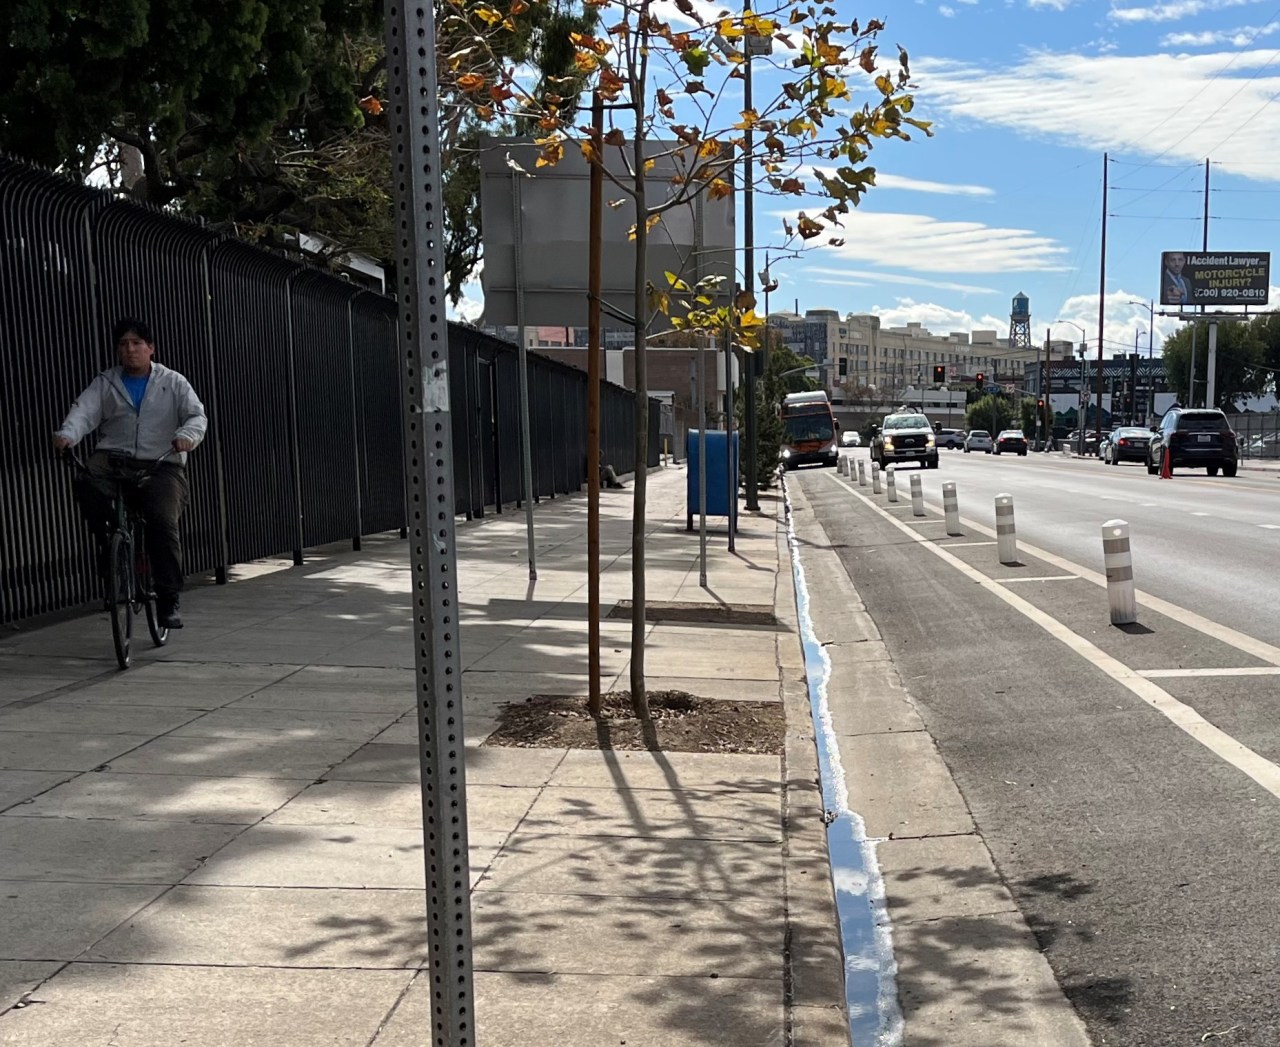 Some cyclists still feel safer riding on the sidewalk, compared to plastic post protection